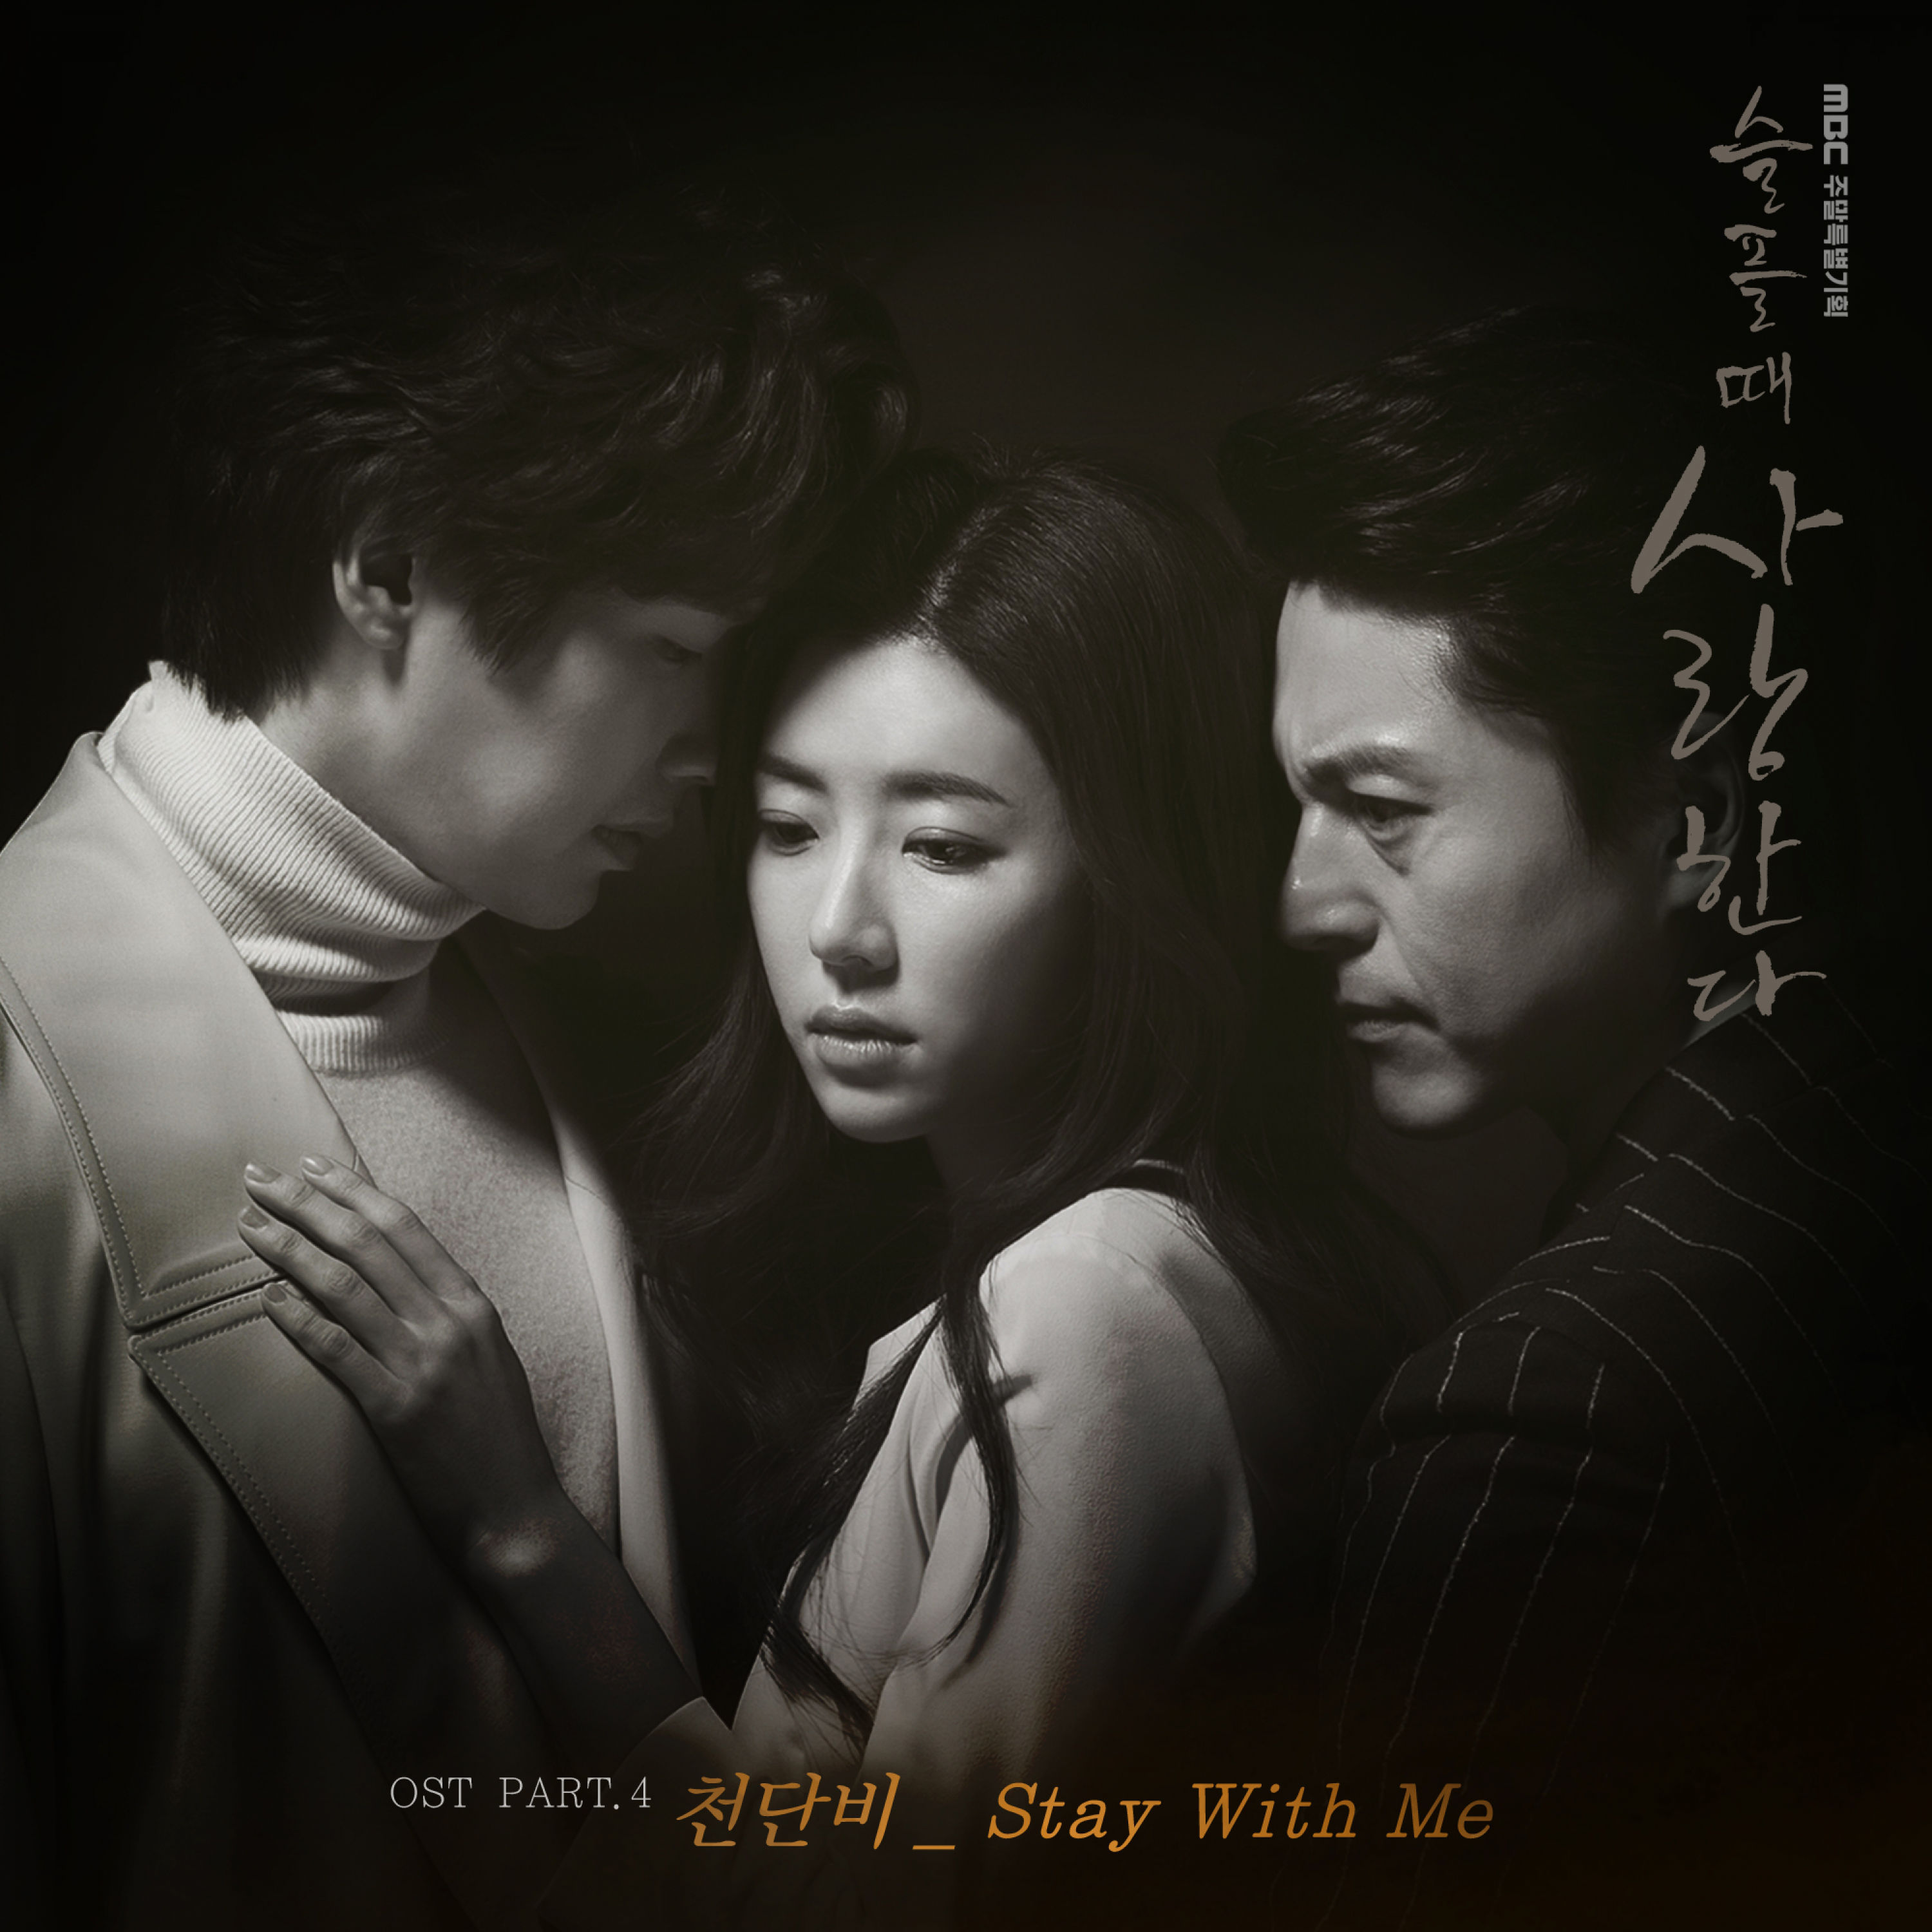 Stay with me say with me